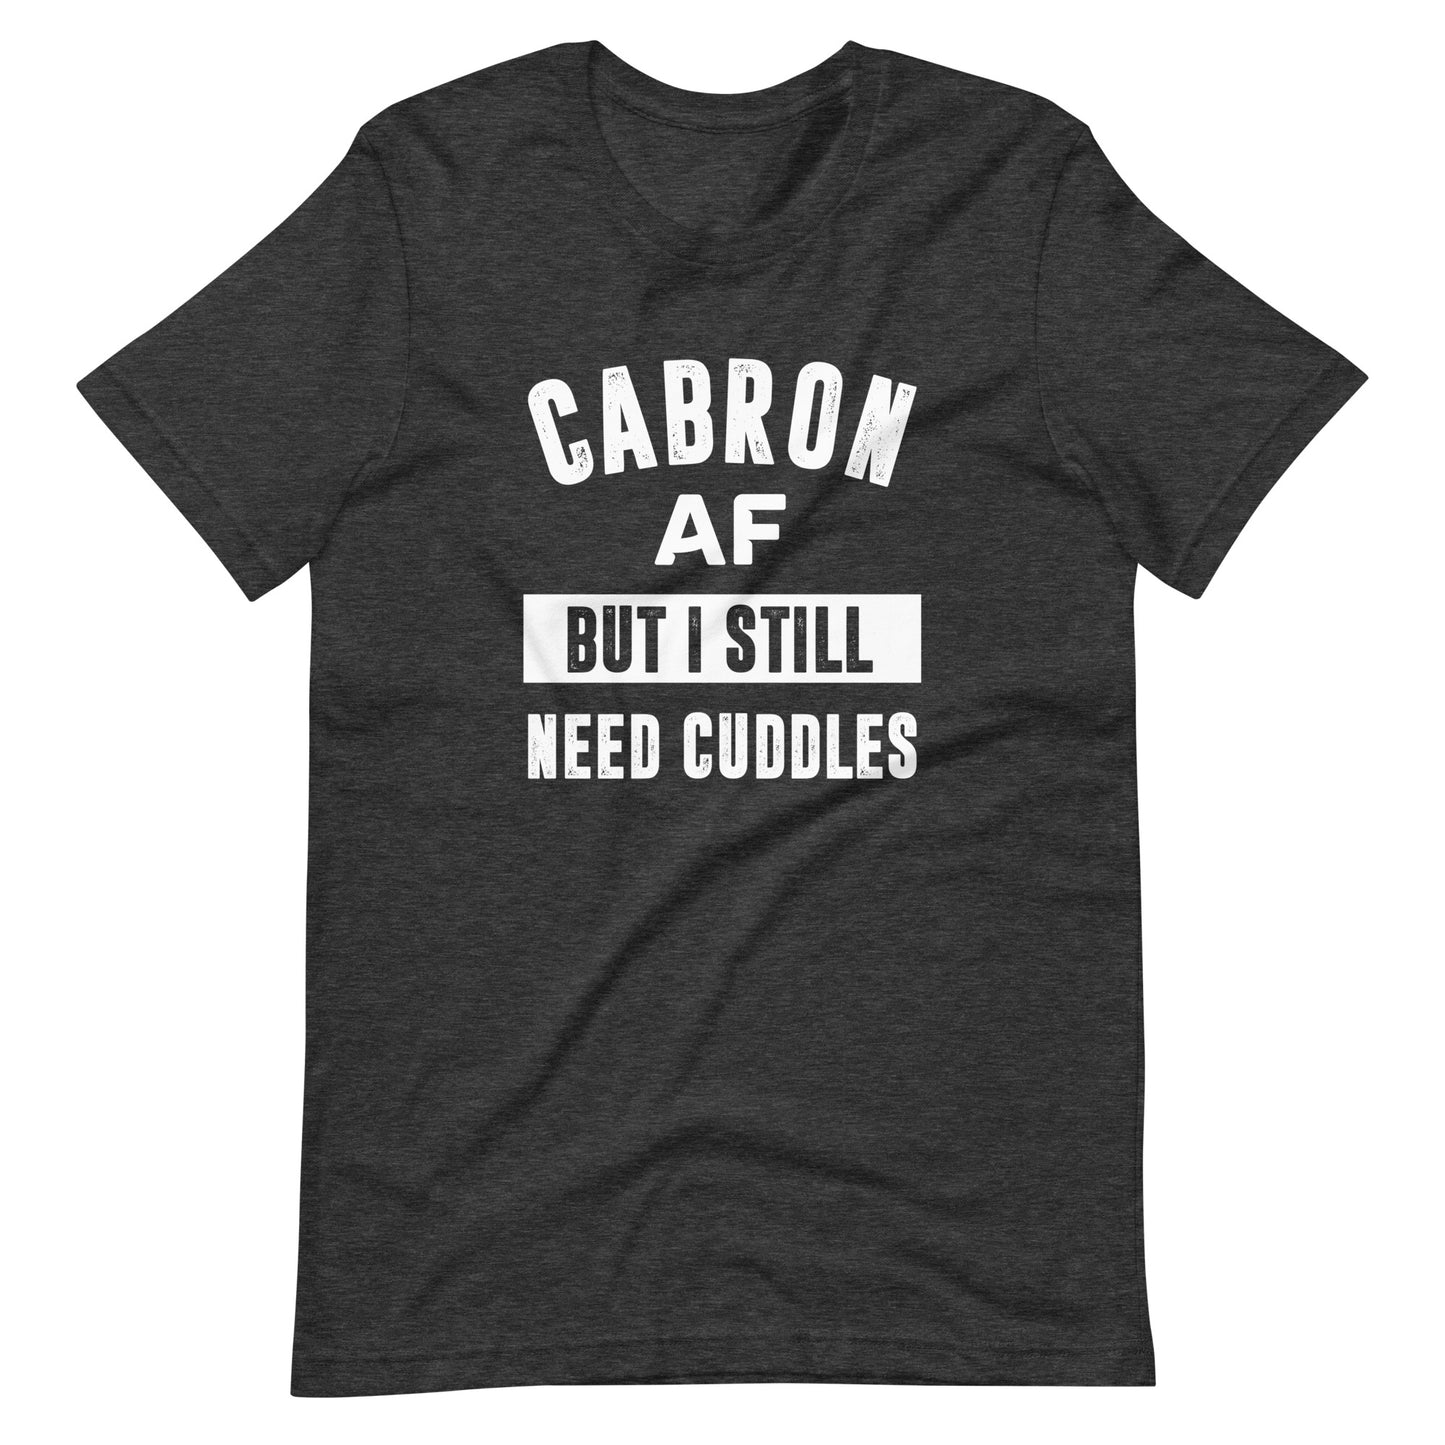 Cabron AF But I Still Need Cuddles T-Shirt for Latino